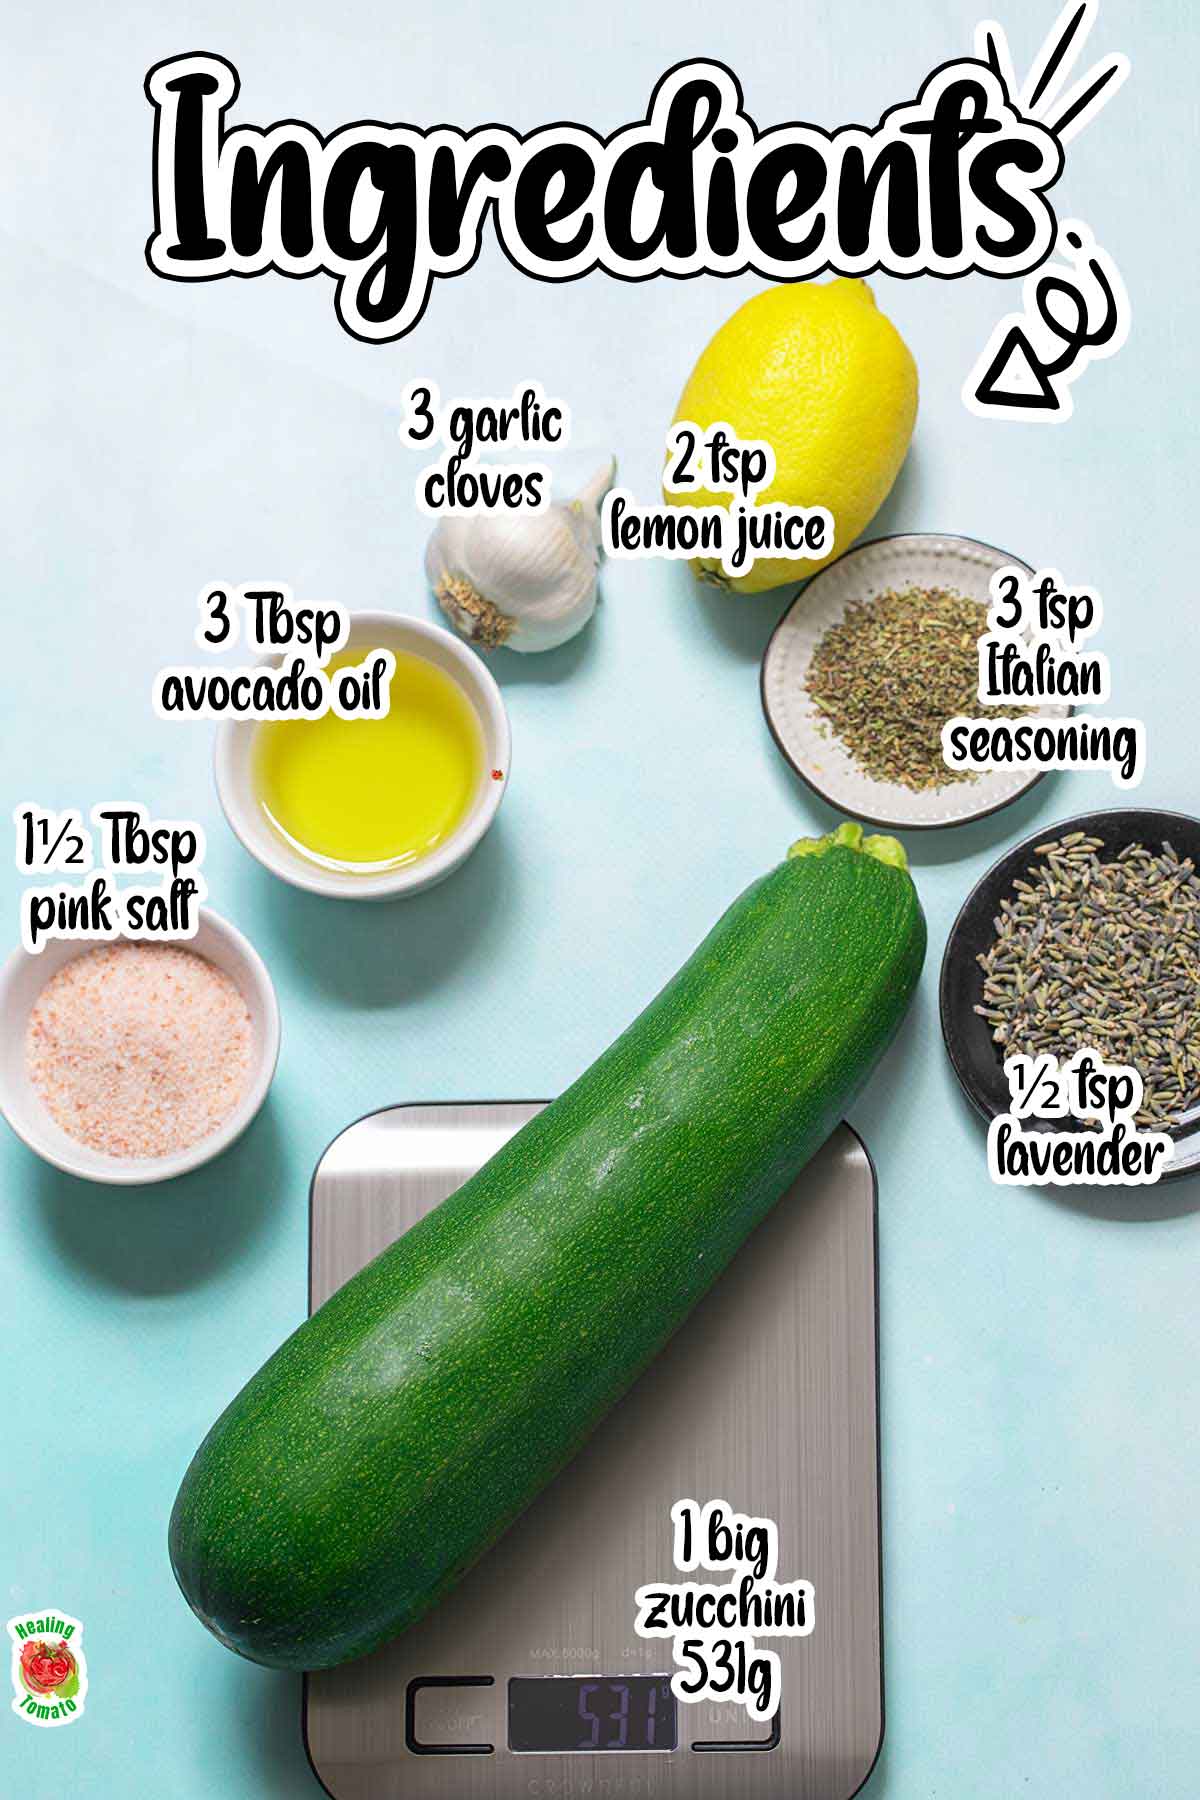 The ingredients needed to make roasted zucchini laid out on a blue background